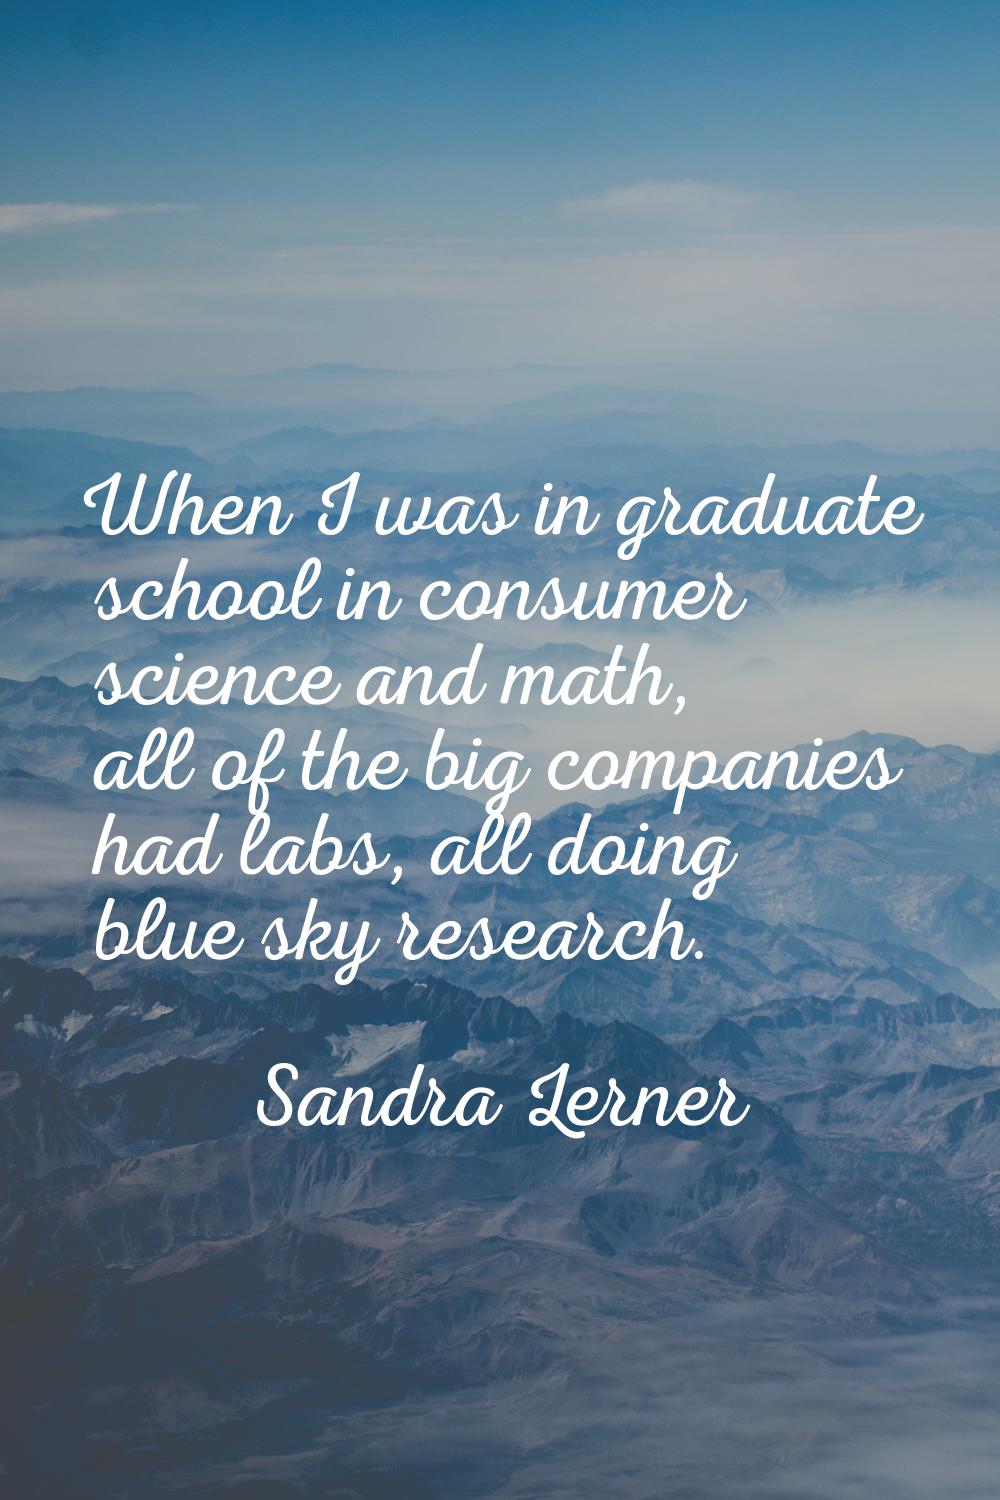 When I was in graduate school in consumer science and math, all of the big companies had labs, all 